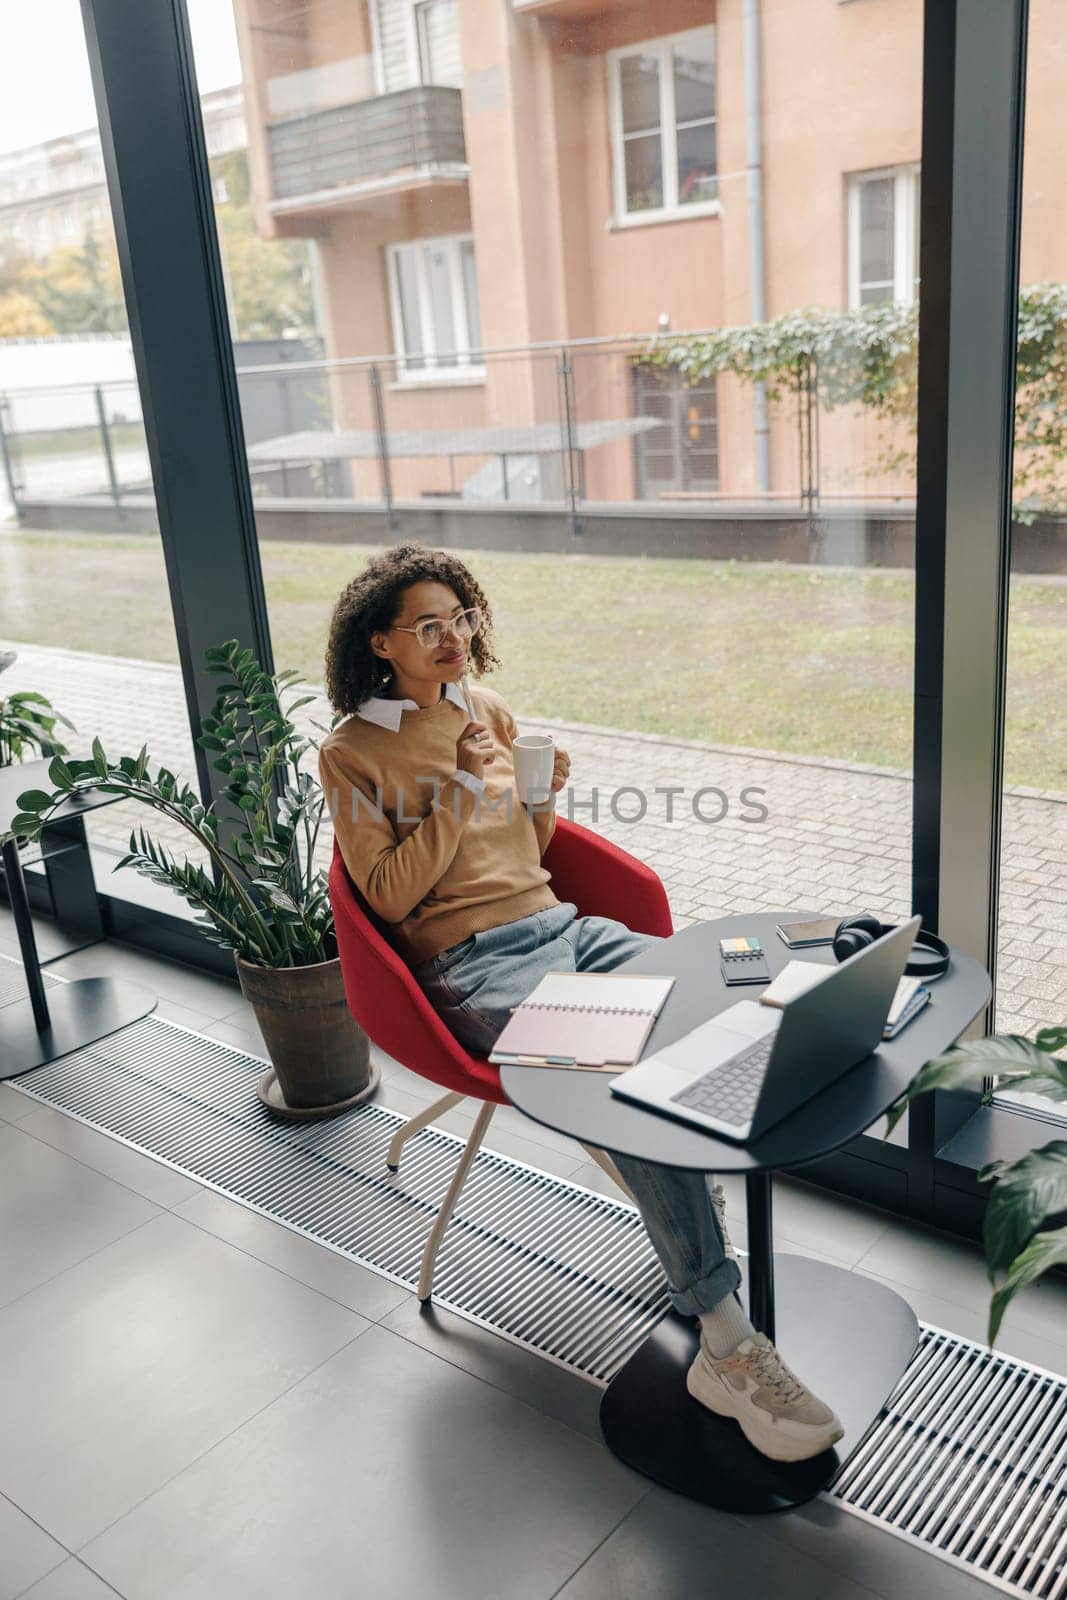 Smiling woman entrepreneur working on laptop, making notes in cozy coworking space interior